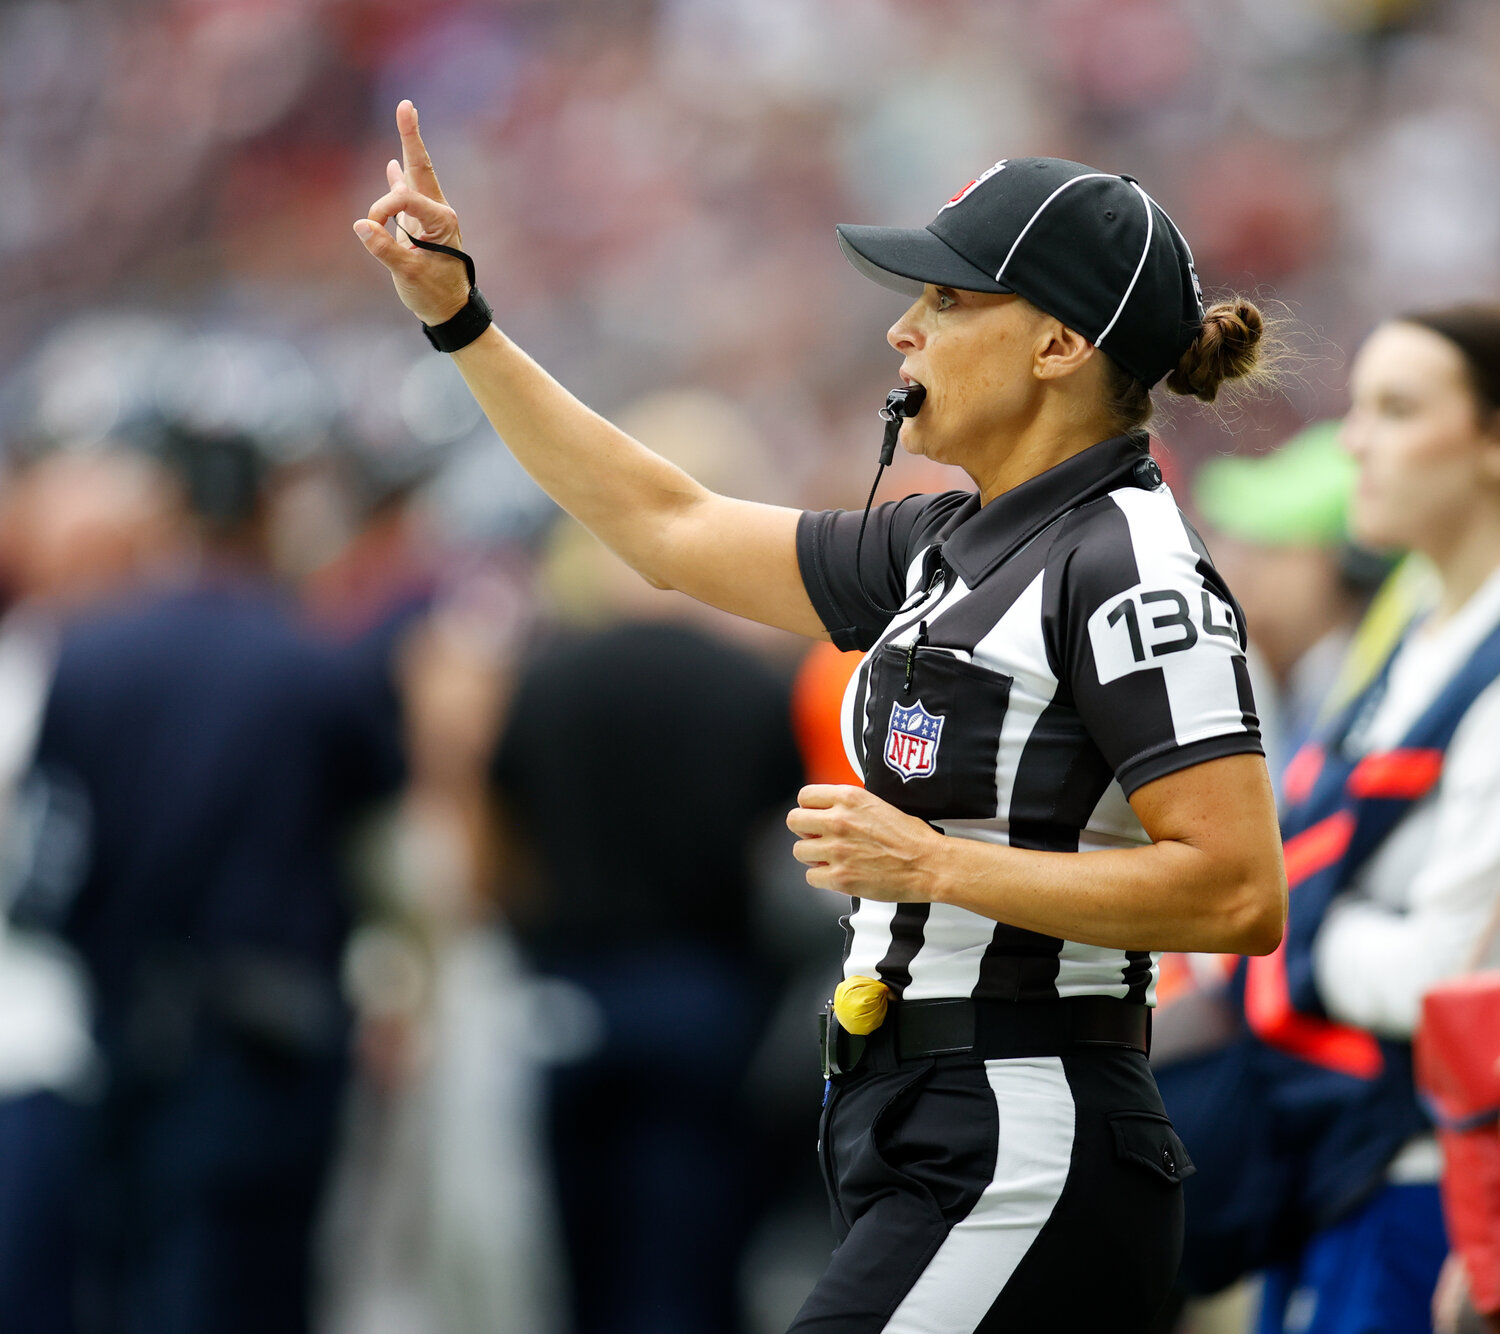 Line judge Robin DeLorenzo (134) during an NFL game between the Texans and the Saints on October 15, 2023 in Houston. The Texans won, 20-13.